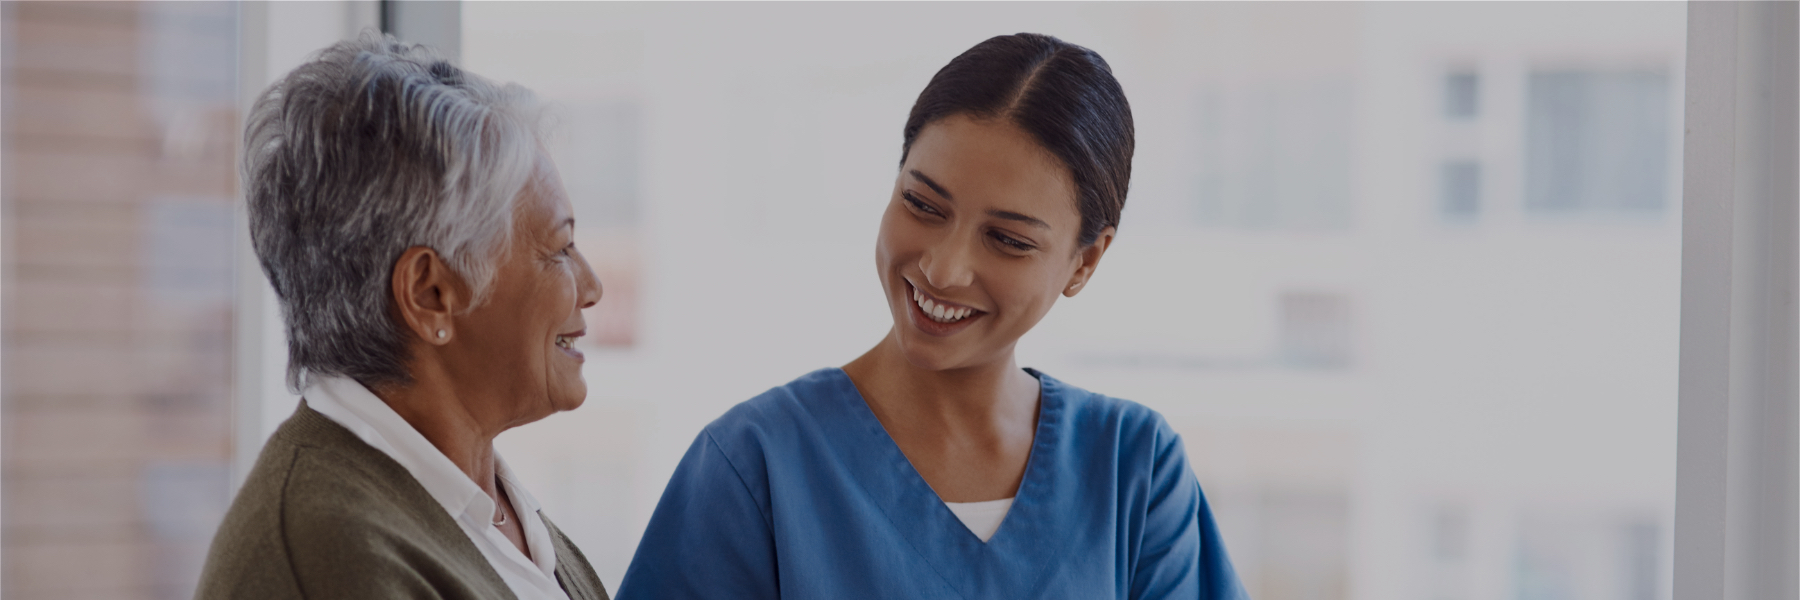 Image of a nurse smiling at a patient and holding her hands